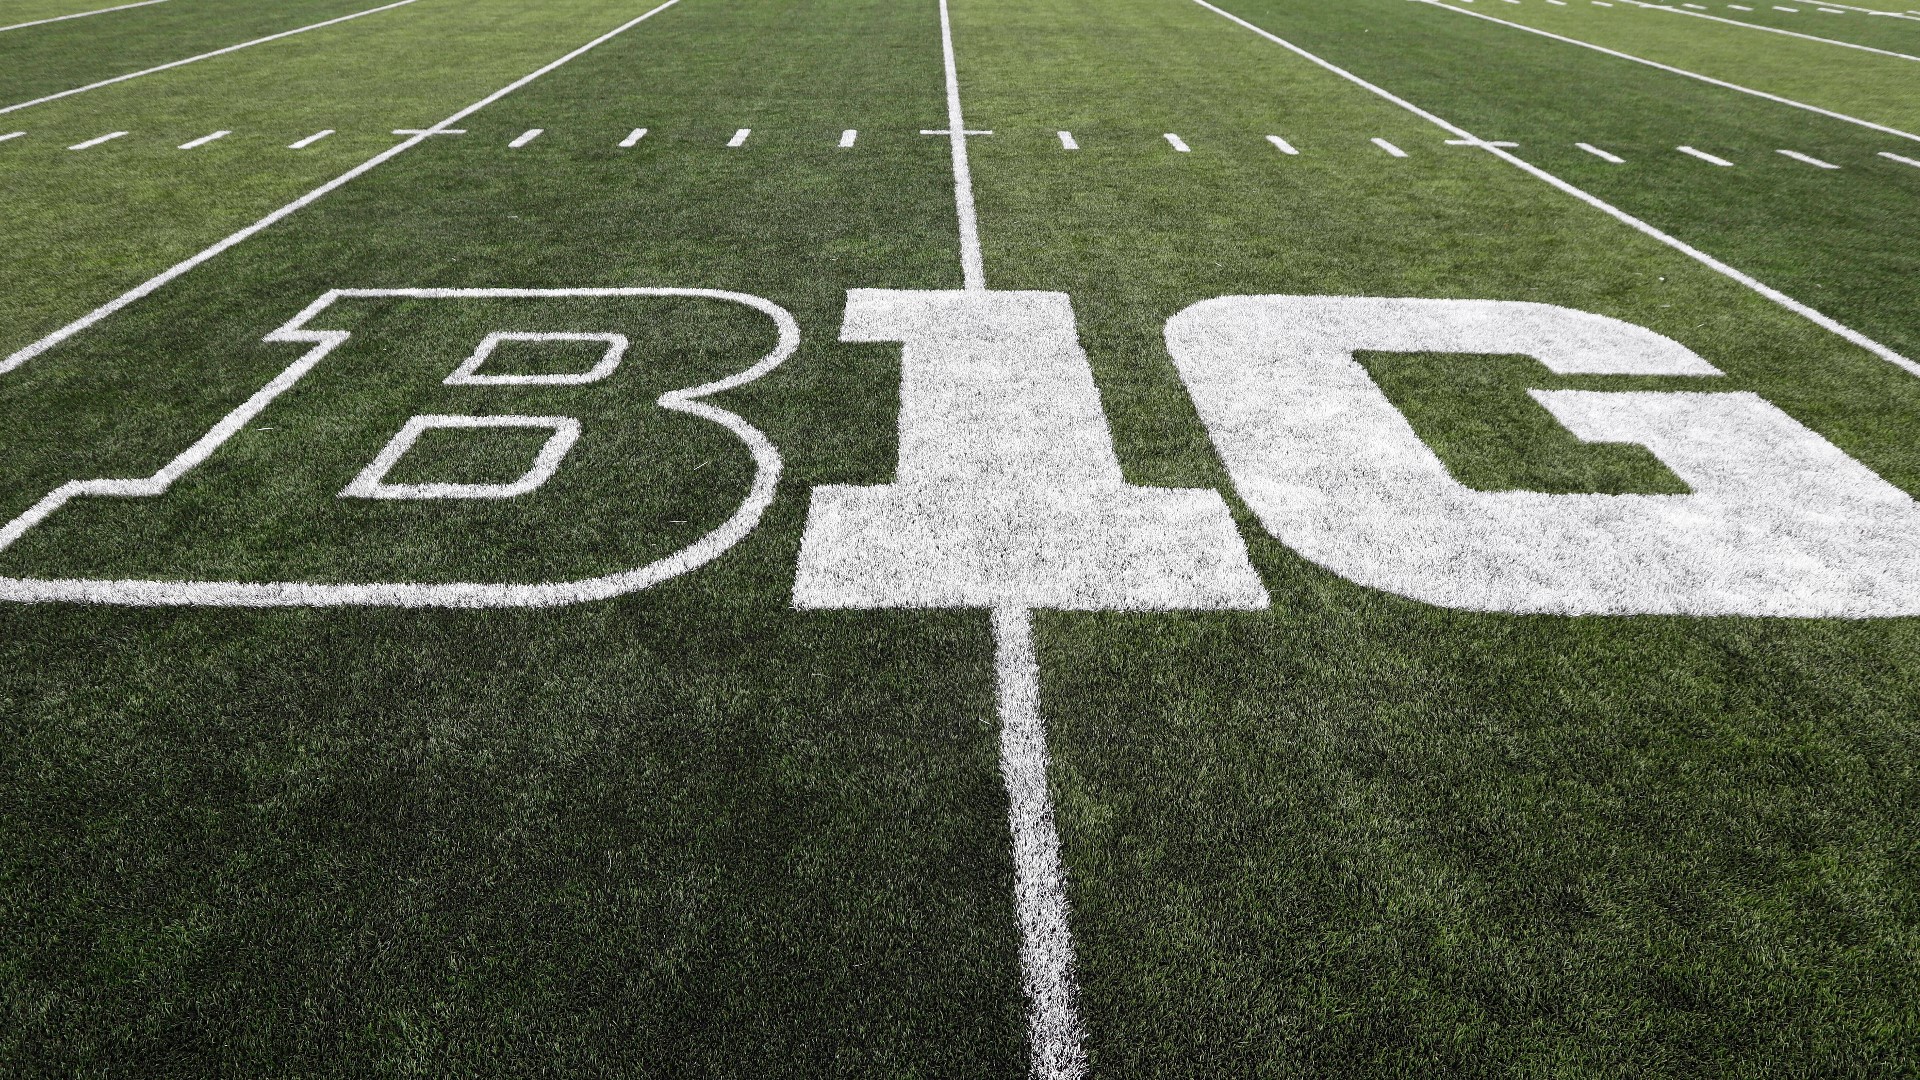 One month after deciding to postpone all fall sports, the Big Ten has announced its conference will start playing football in October.